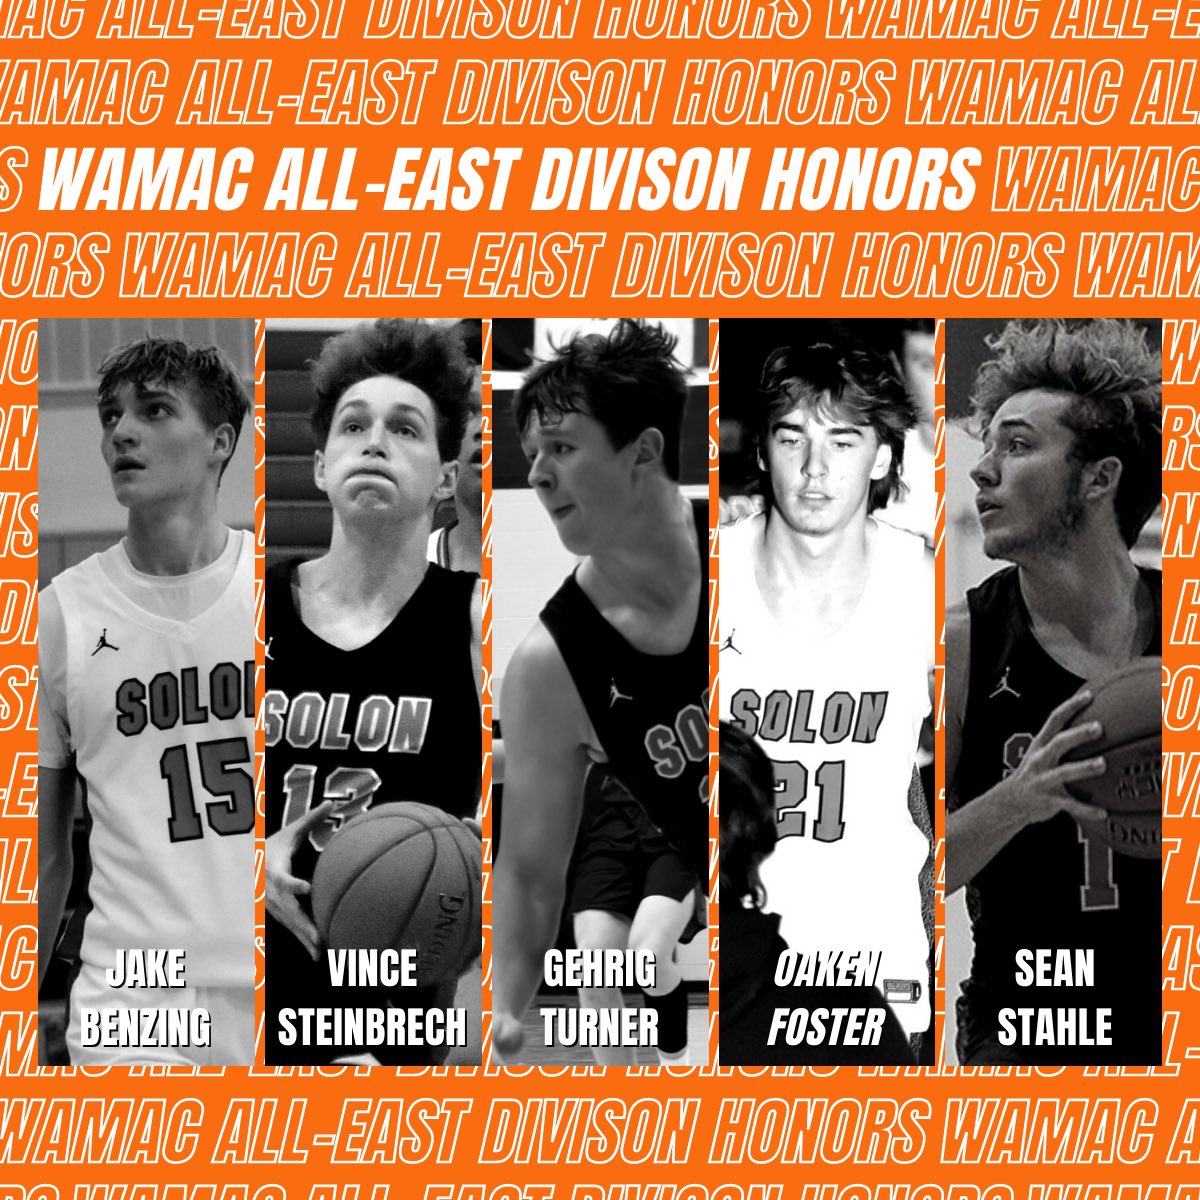 Congratulations to the 5 players who represented Solon in the WAMAC All-East Division Honors! First Team - @JakeBenzing1 Second Team - @GehrigTurner Second Team - @VinceSteinbrech Honorable Mention - @OakenFoster10 Honorable Mention - @StahleSean #SolonStrong